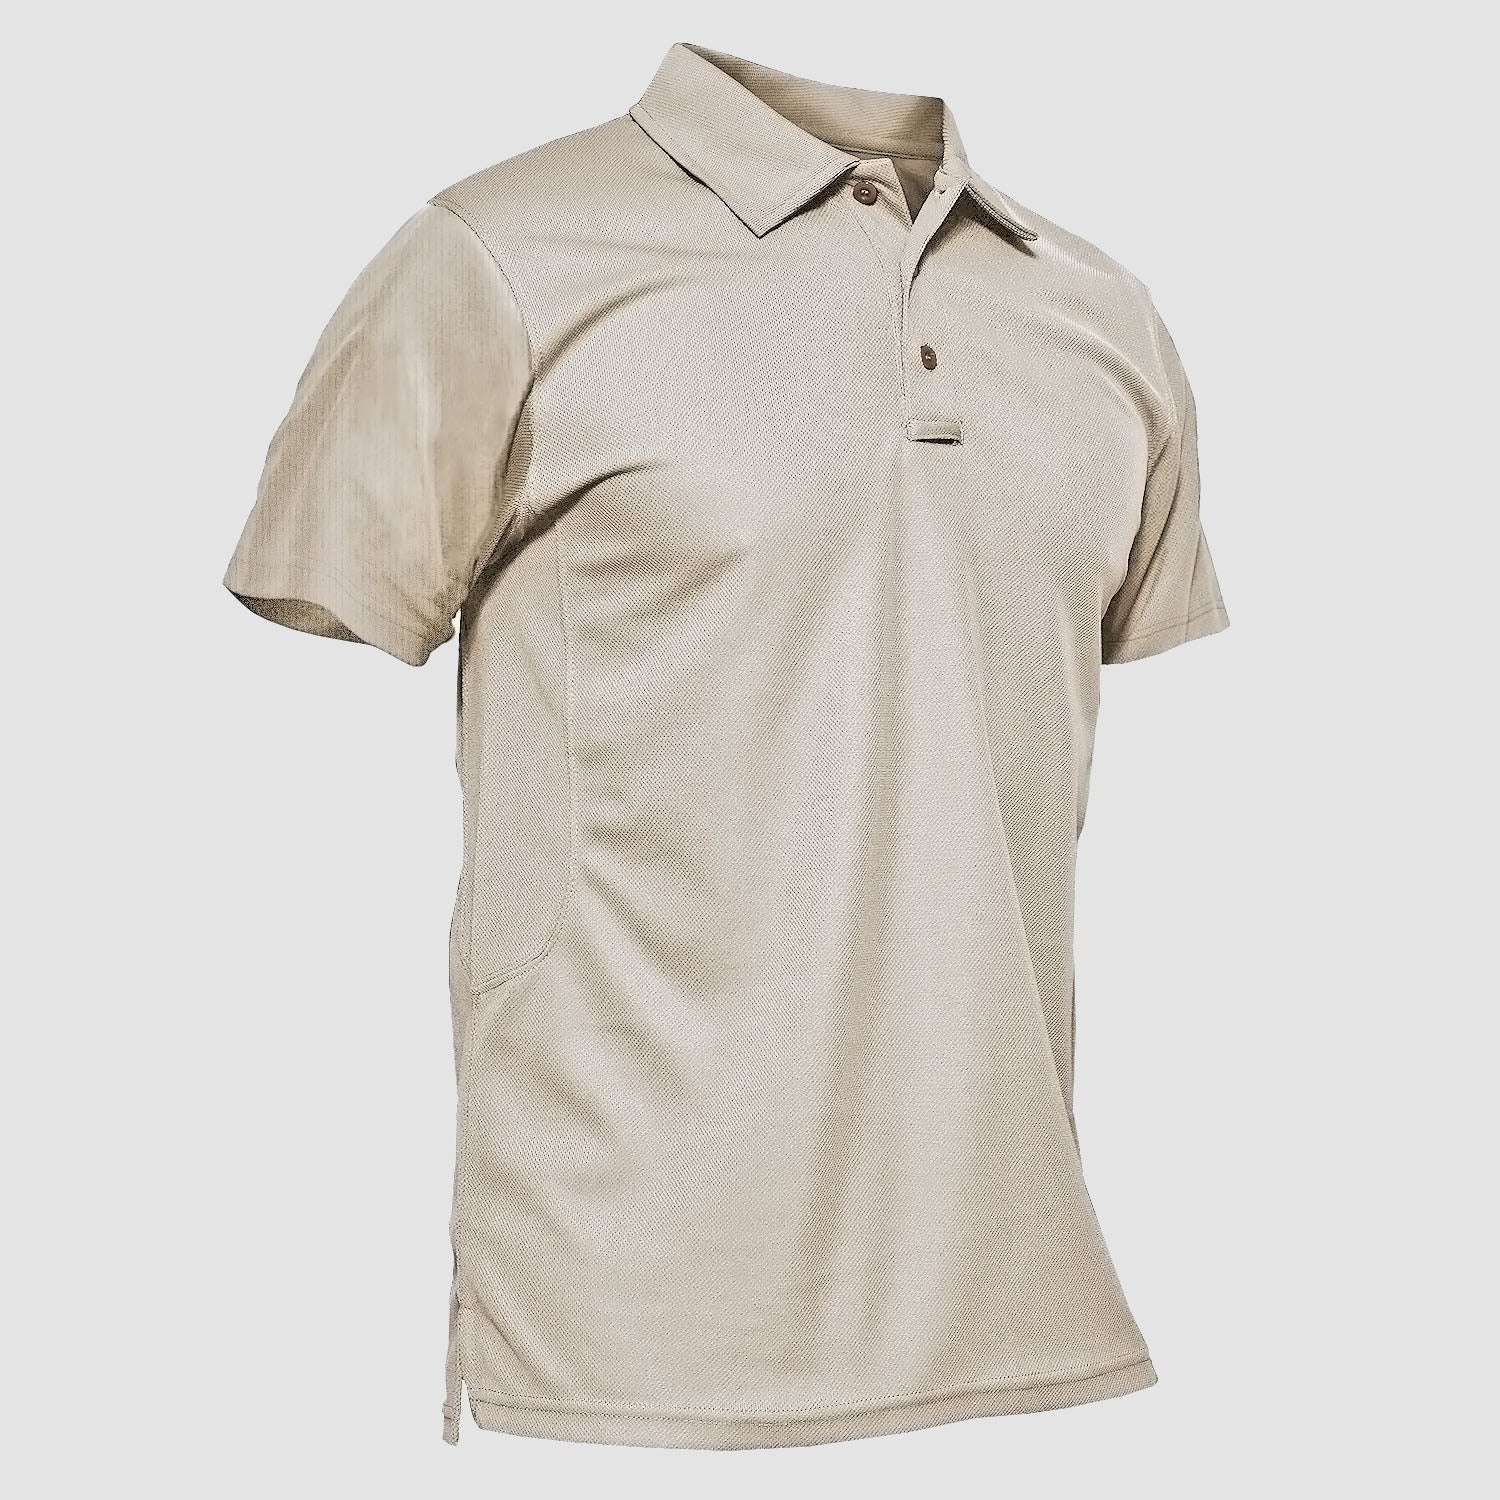 Buy Men's Polo Shirts Collection Online